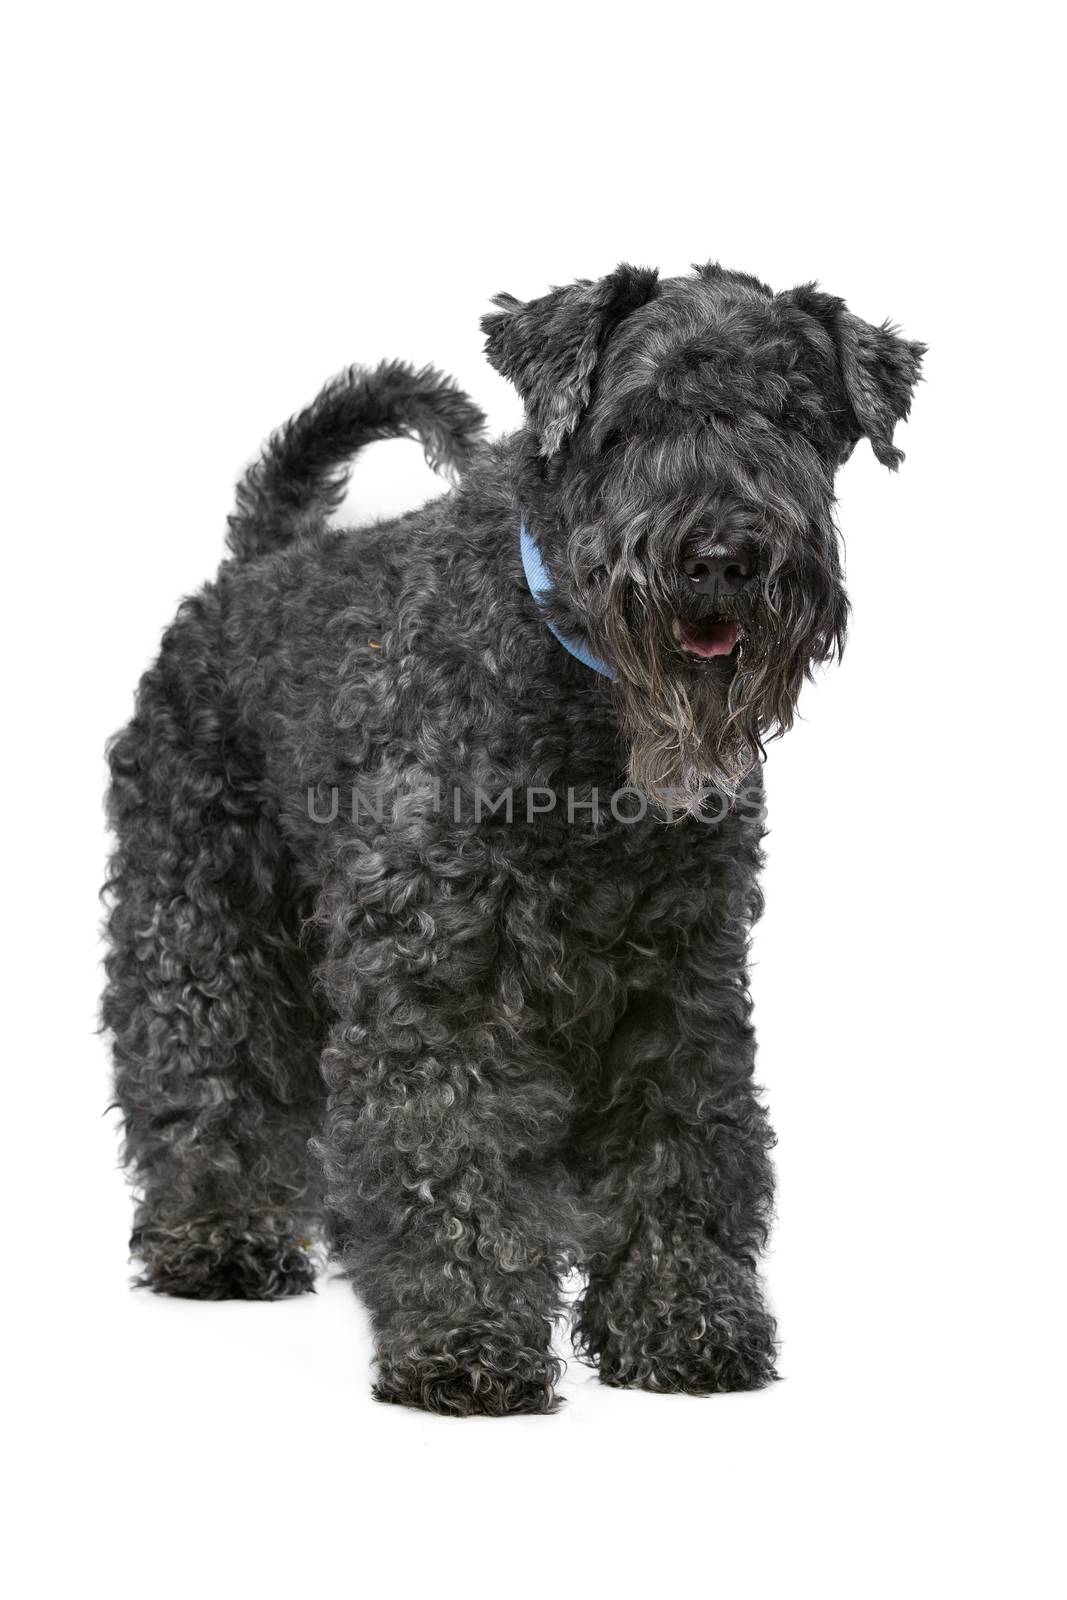 Eight year old Kerry Blue Terrier standing in front of a white background